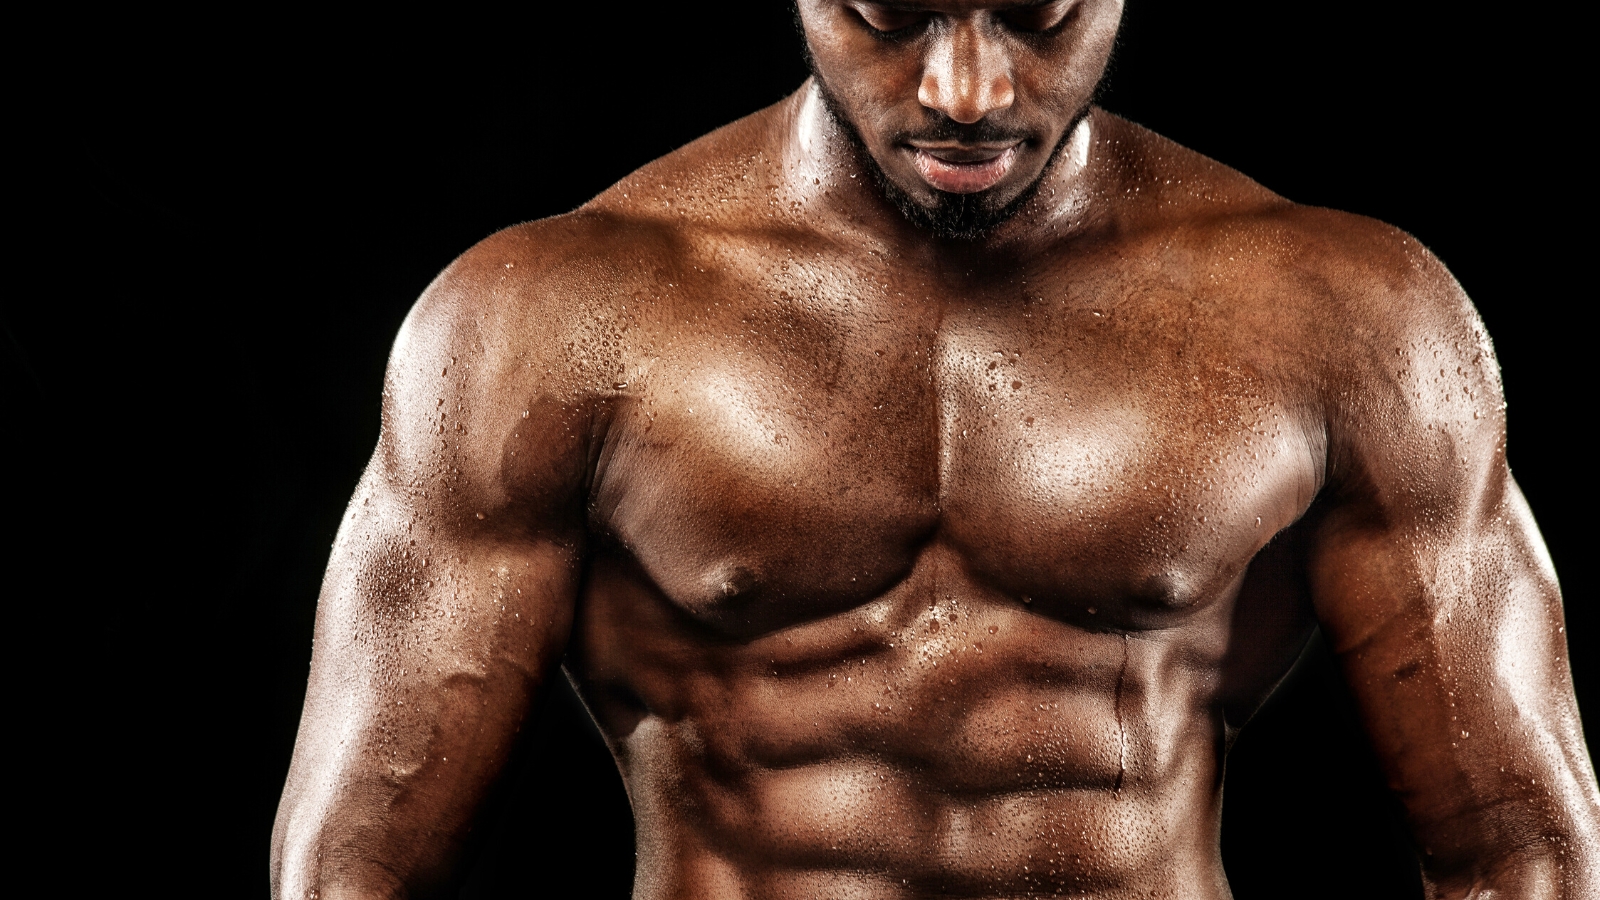 Powerbuilding Chest Workout: Complete workout for strength and mass 